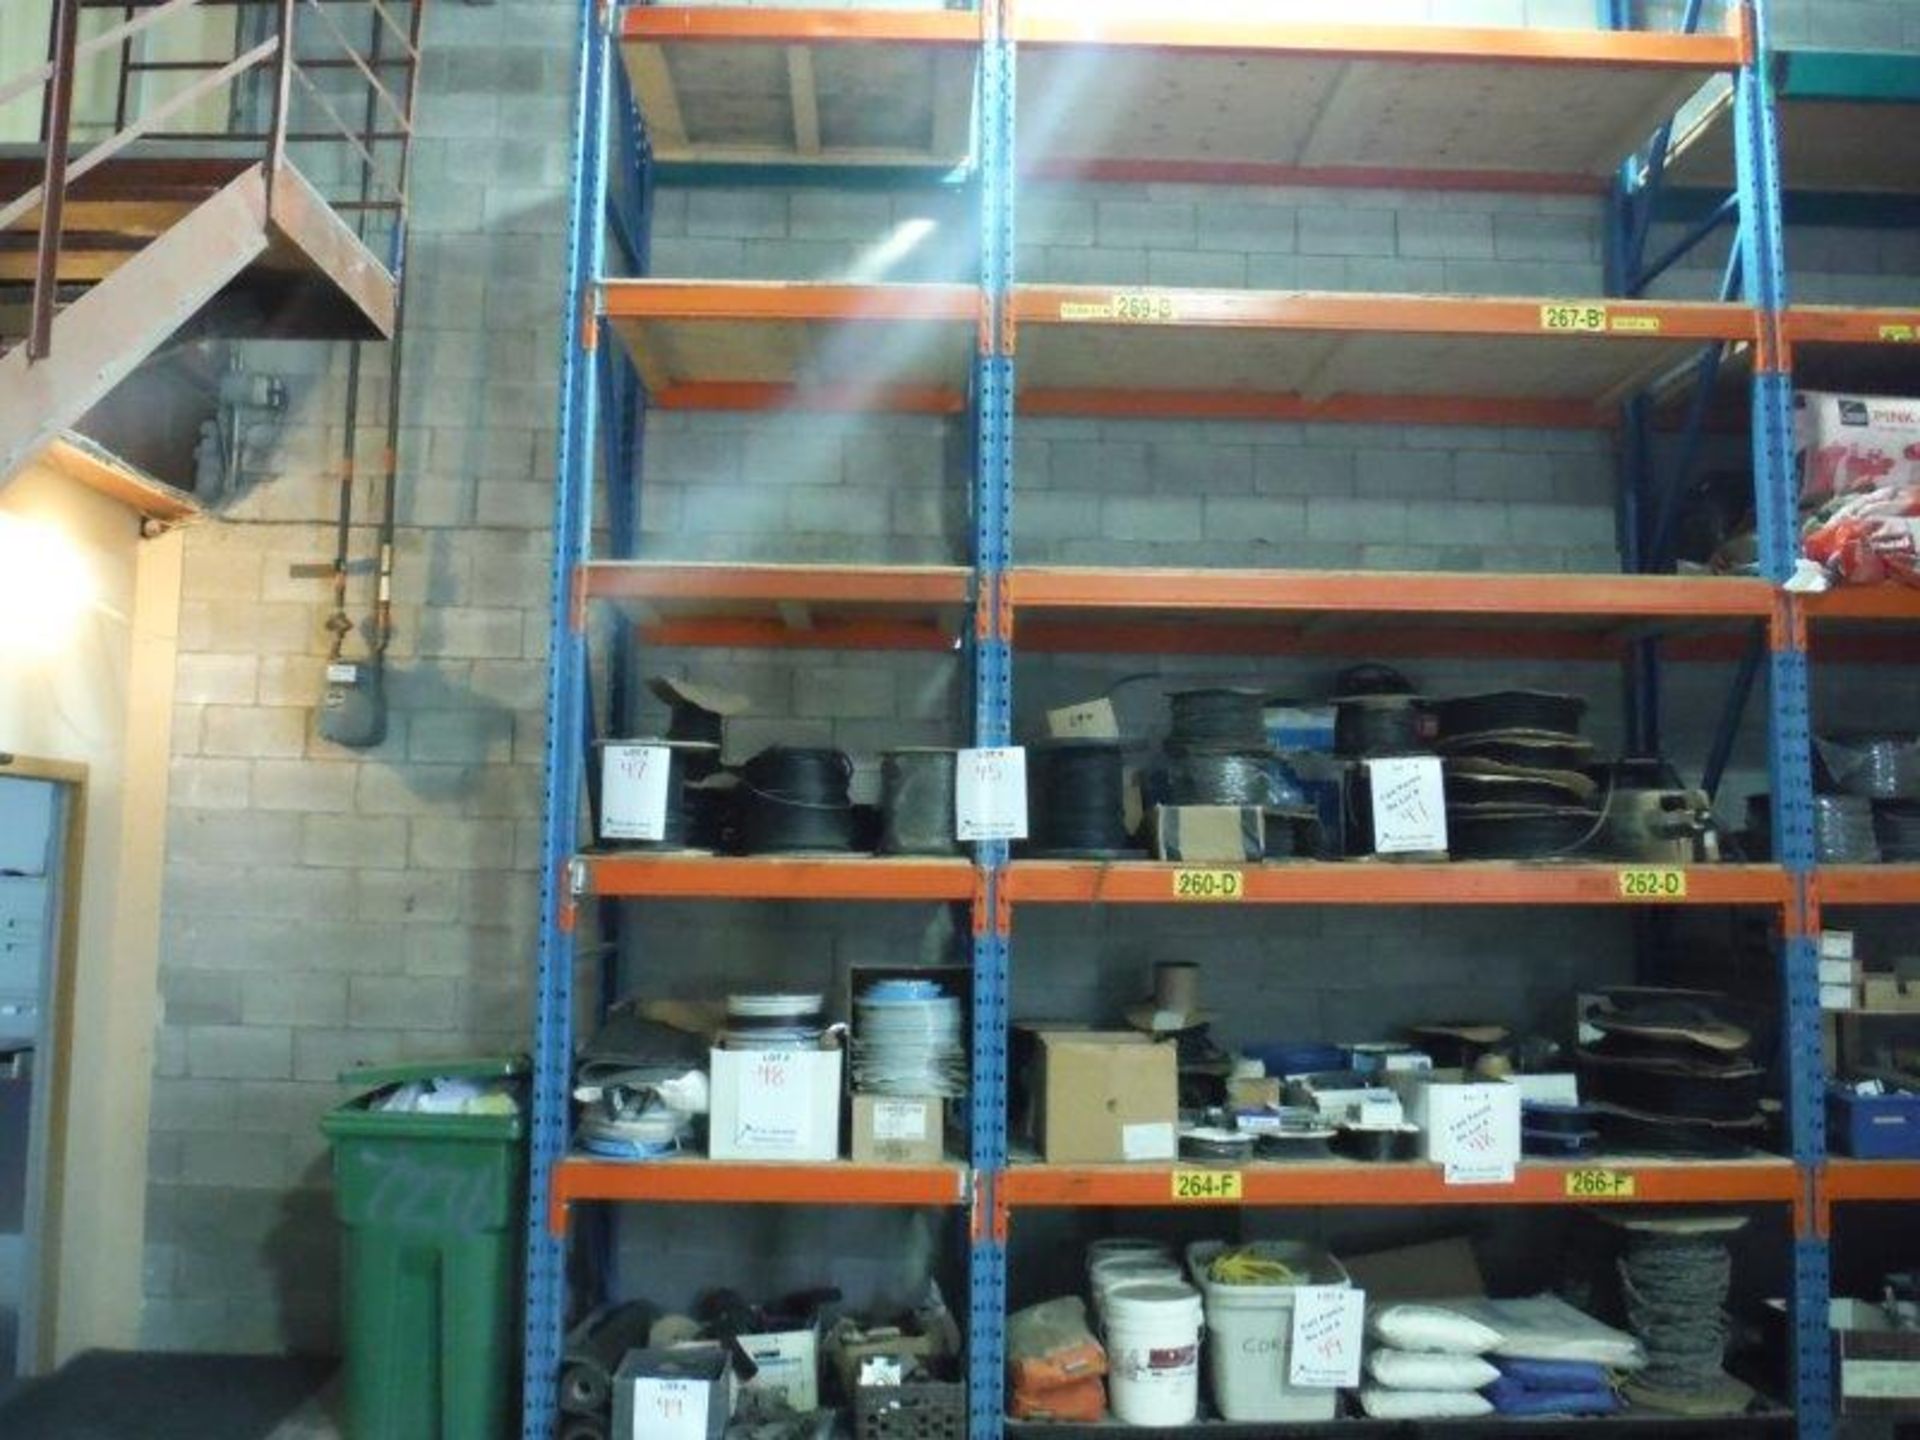 INDUSTRIAL PALLET RACKS (NO CONTENTS) 2 SECTIONS 96"x42"x16FT. H - (NO CONTENTS)